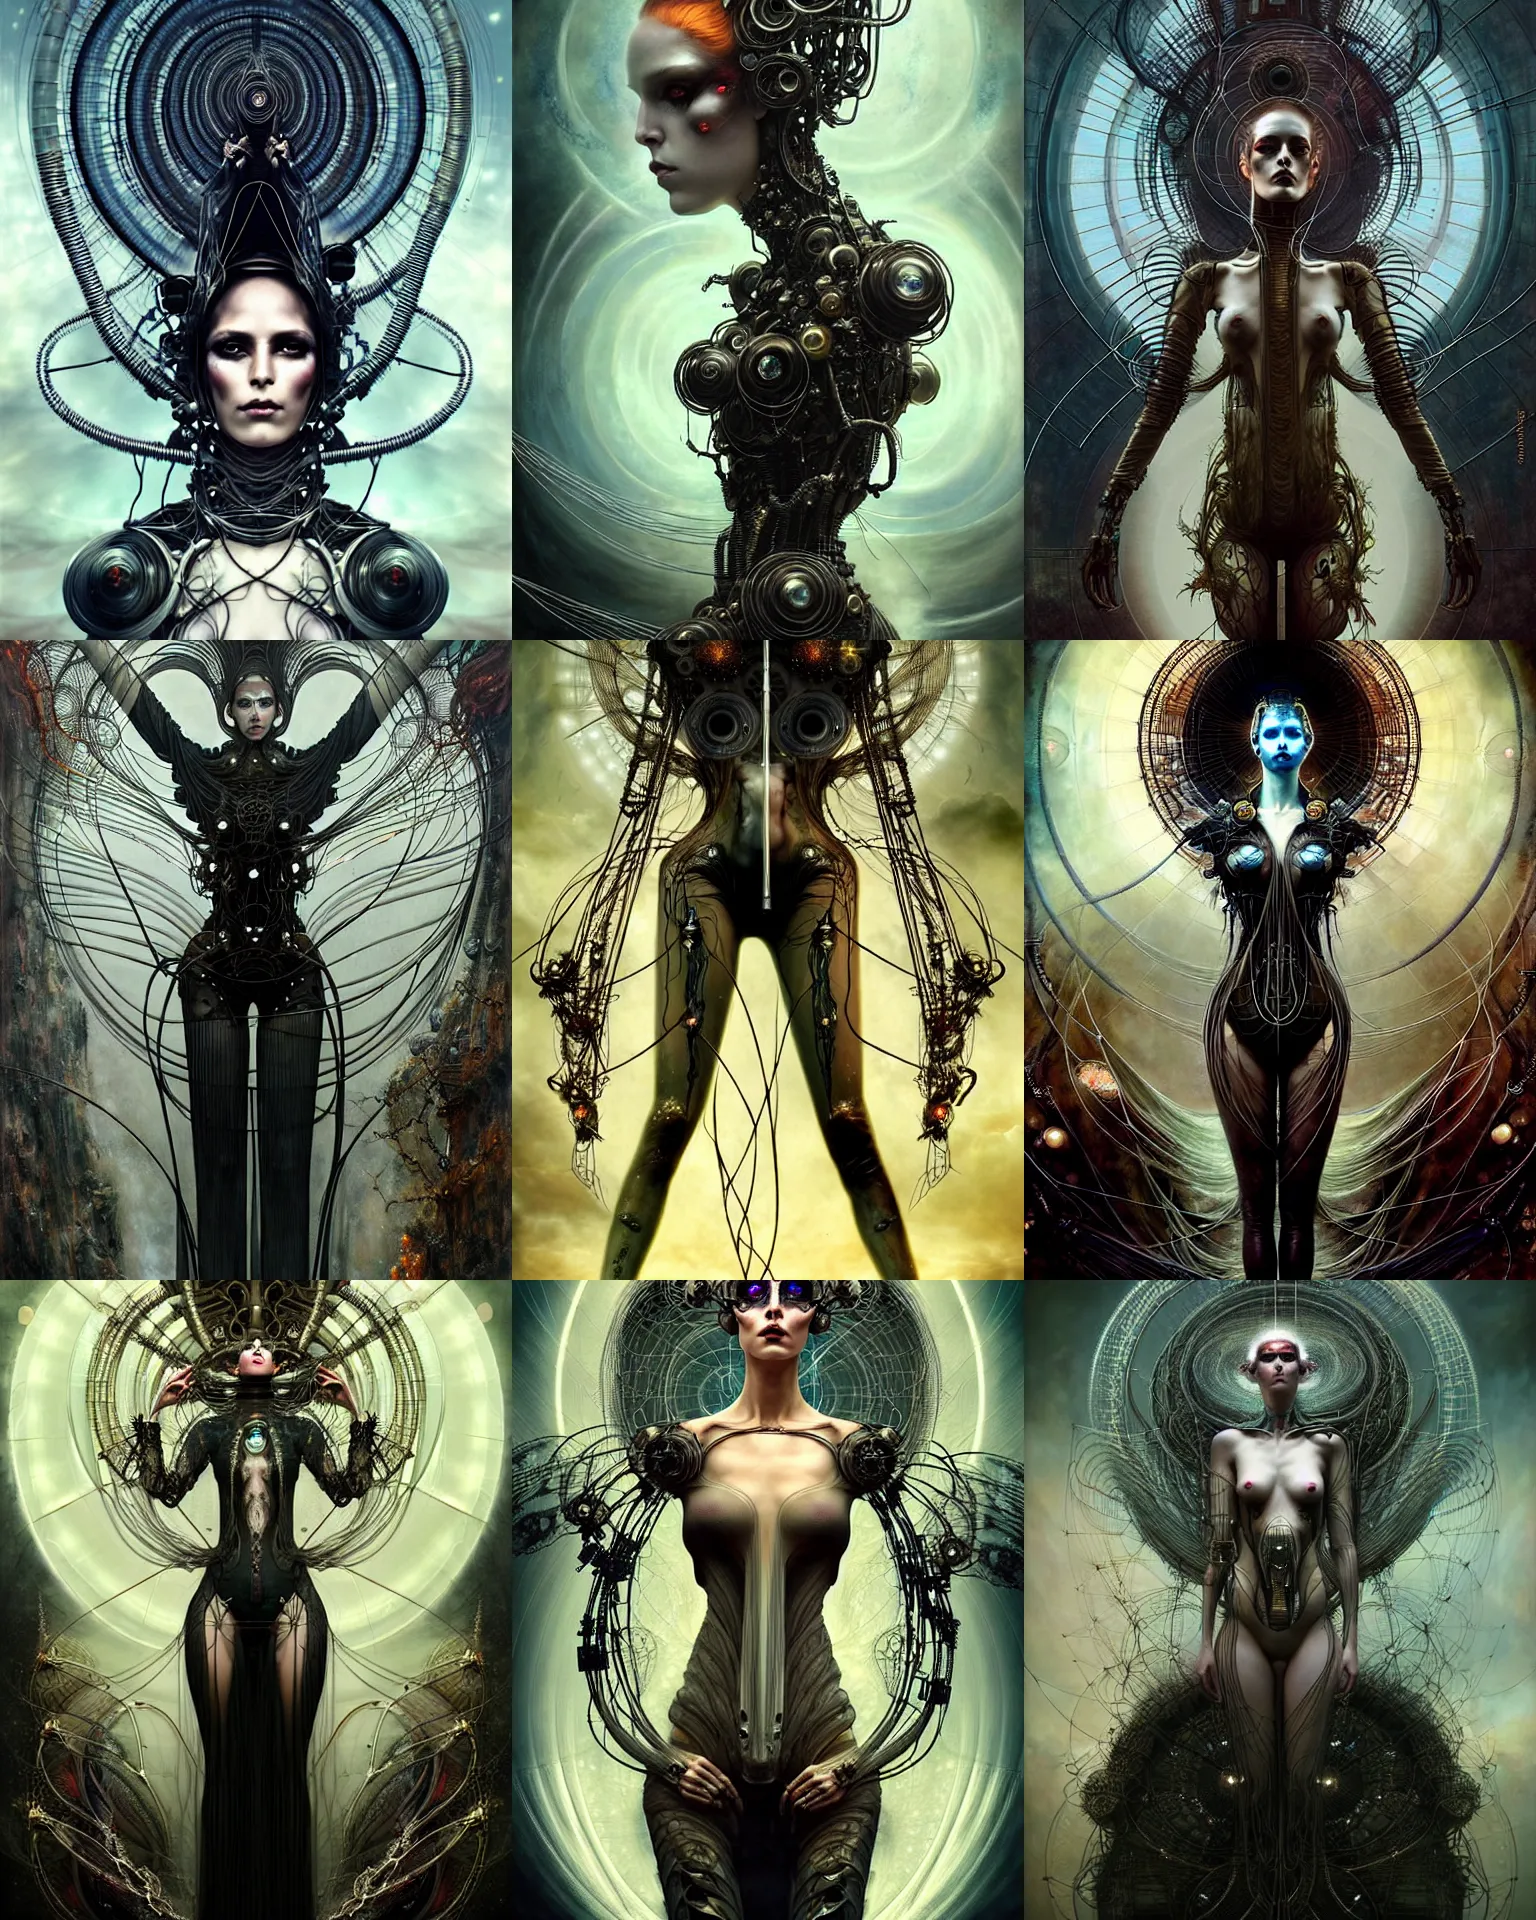 Prompt: karol bak and tom bagshaw and bastien lecouffe - deharme full body symmetrical character portrait of a supermodel as the borg queen of parasitic glitchcore rebirth, floating in a powerful zen state, beautiful and ominous, wearing combination of mecha and bodysuit made of wires and garland, machinery enveloping nature in the background, scifi character render